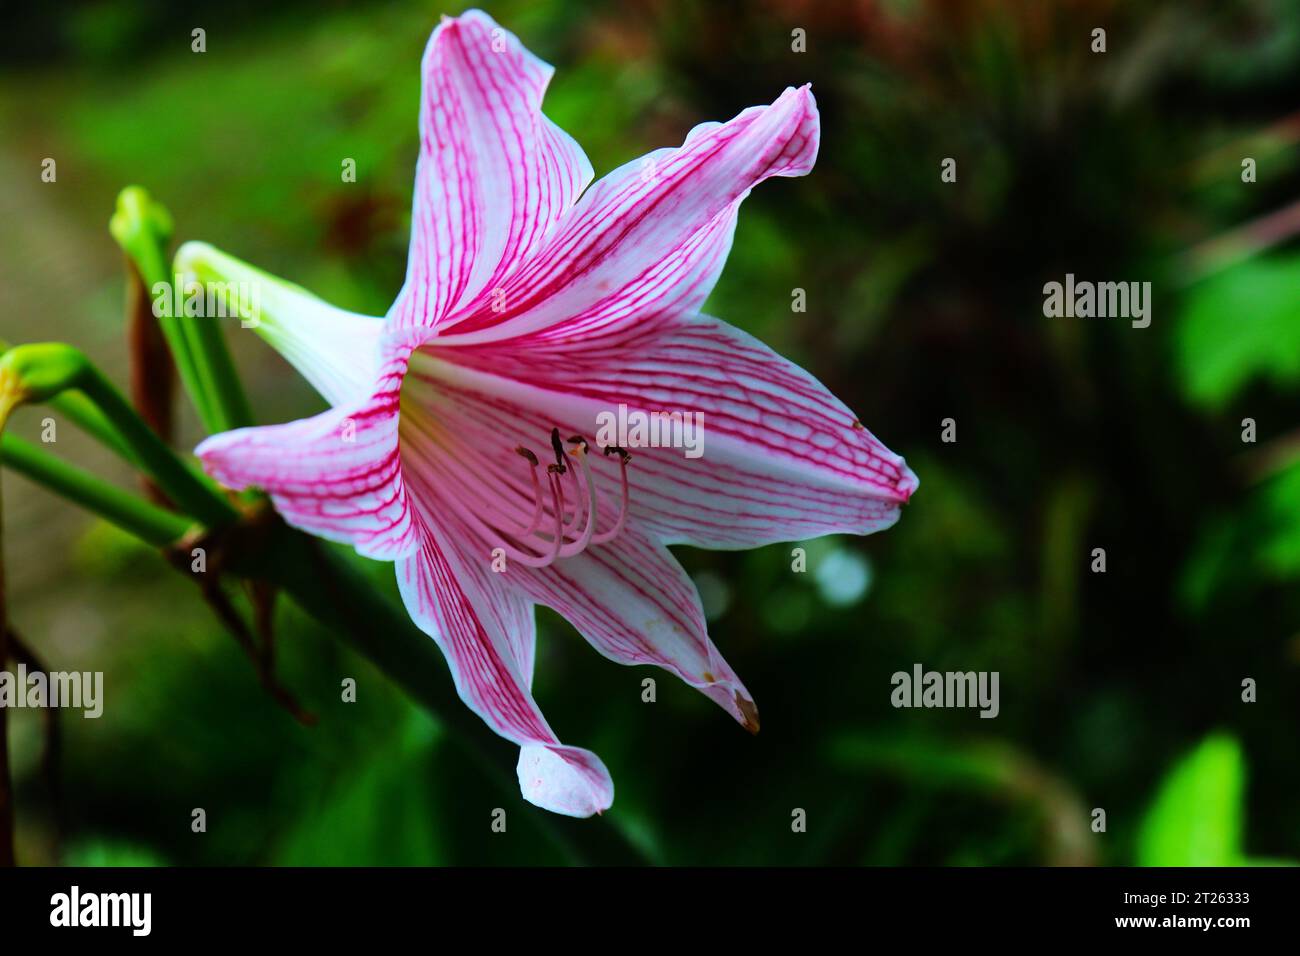 Barbados lily is a flower blooming in autumn, characterized by white streaks in leaves and flowers. Stock Photo